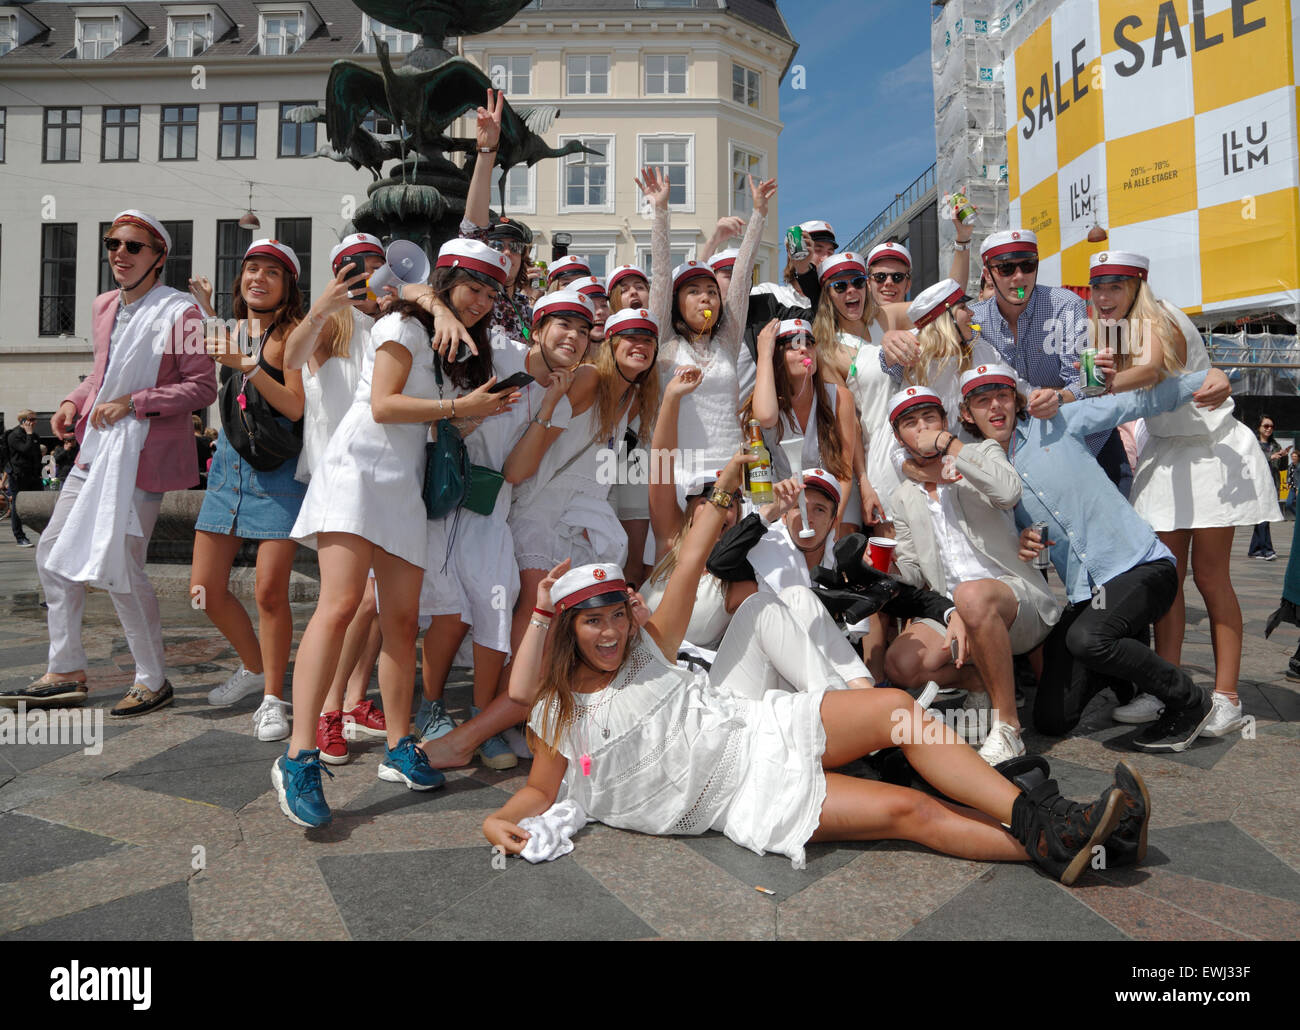 Copenhagen, Denmark. June 26, 2015. Danish students celebrate their high school, grammar school graduation. A dance around and a dip or dive into the cold water of the Stork Fountain (Storkespringvandet) on the pedestrian street, Stroeget, is a traditional element on the day of celebration for  graduated students in Greater Copenhagen. It is often part of the long, exhausting and high-spirited truck tour visiting each student’s home for refreshments. Credit:  Niels Quist/Alamy Live News Stock Photo